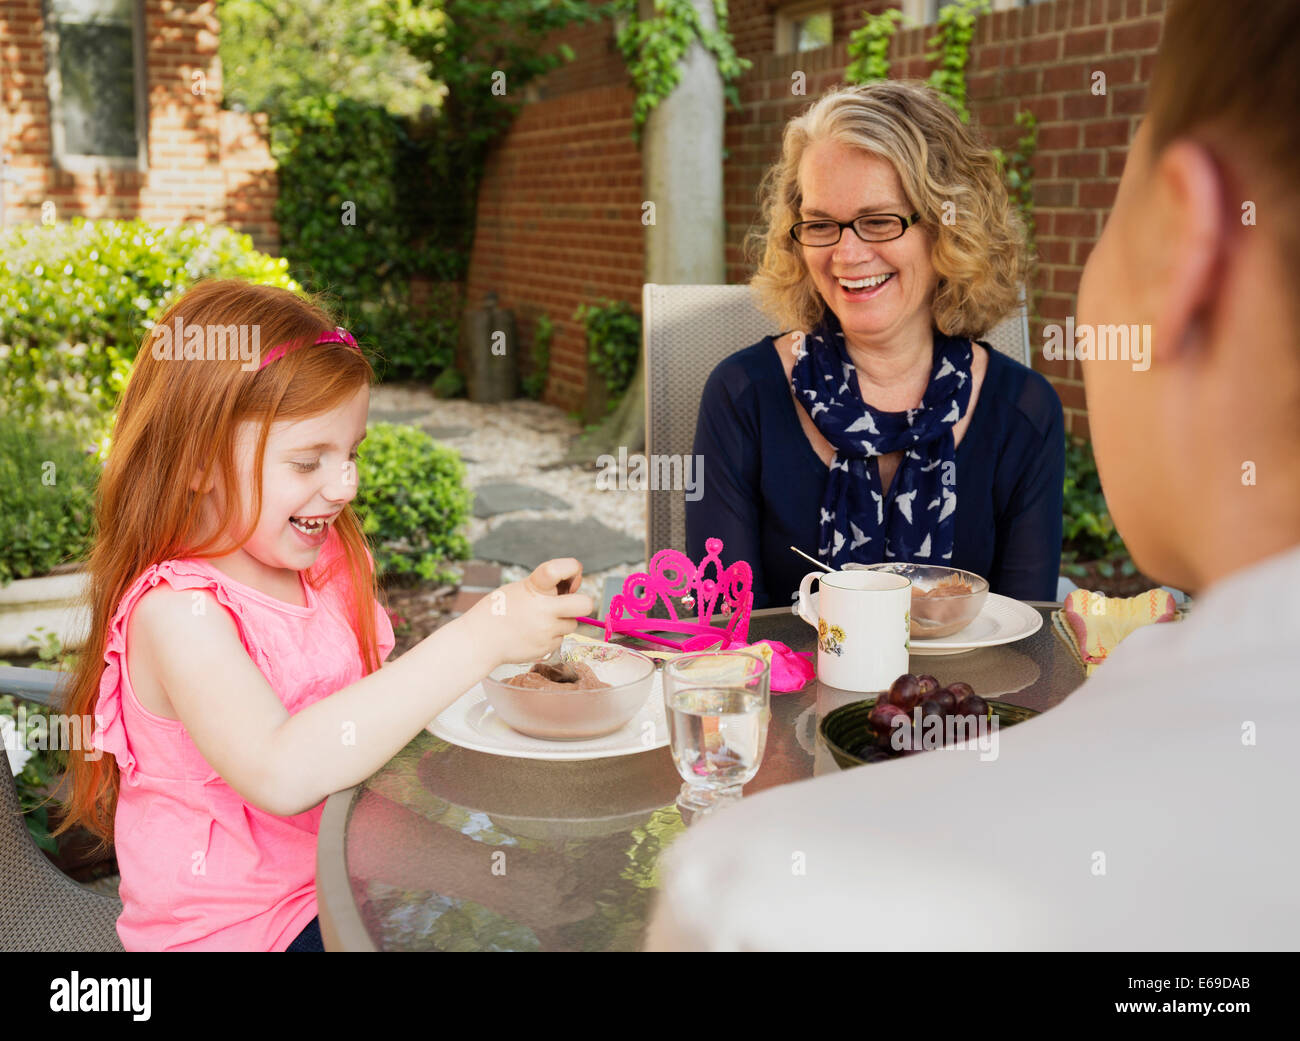 Caucasian family eating together in backyard Stock Photo